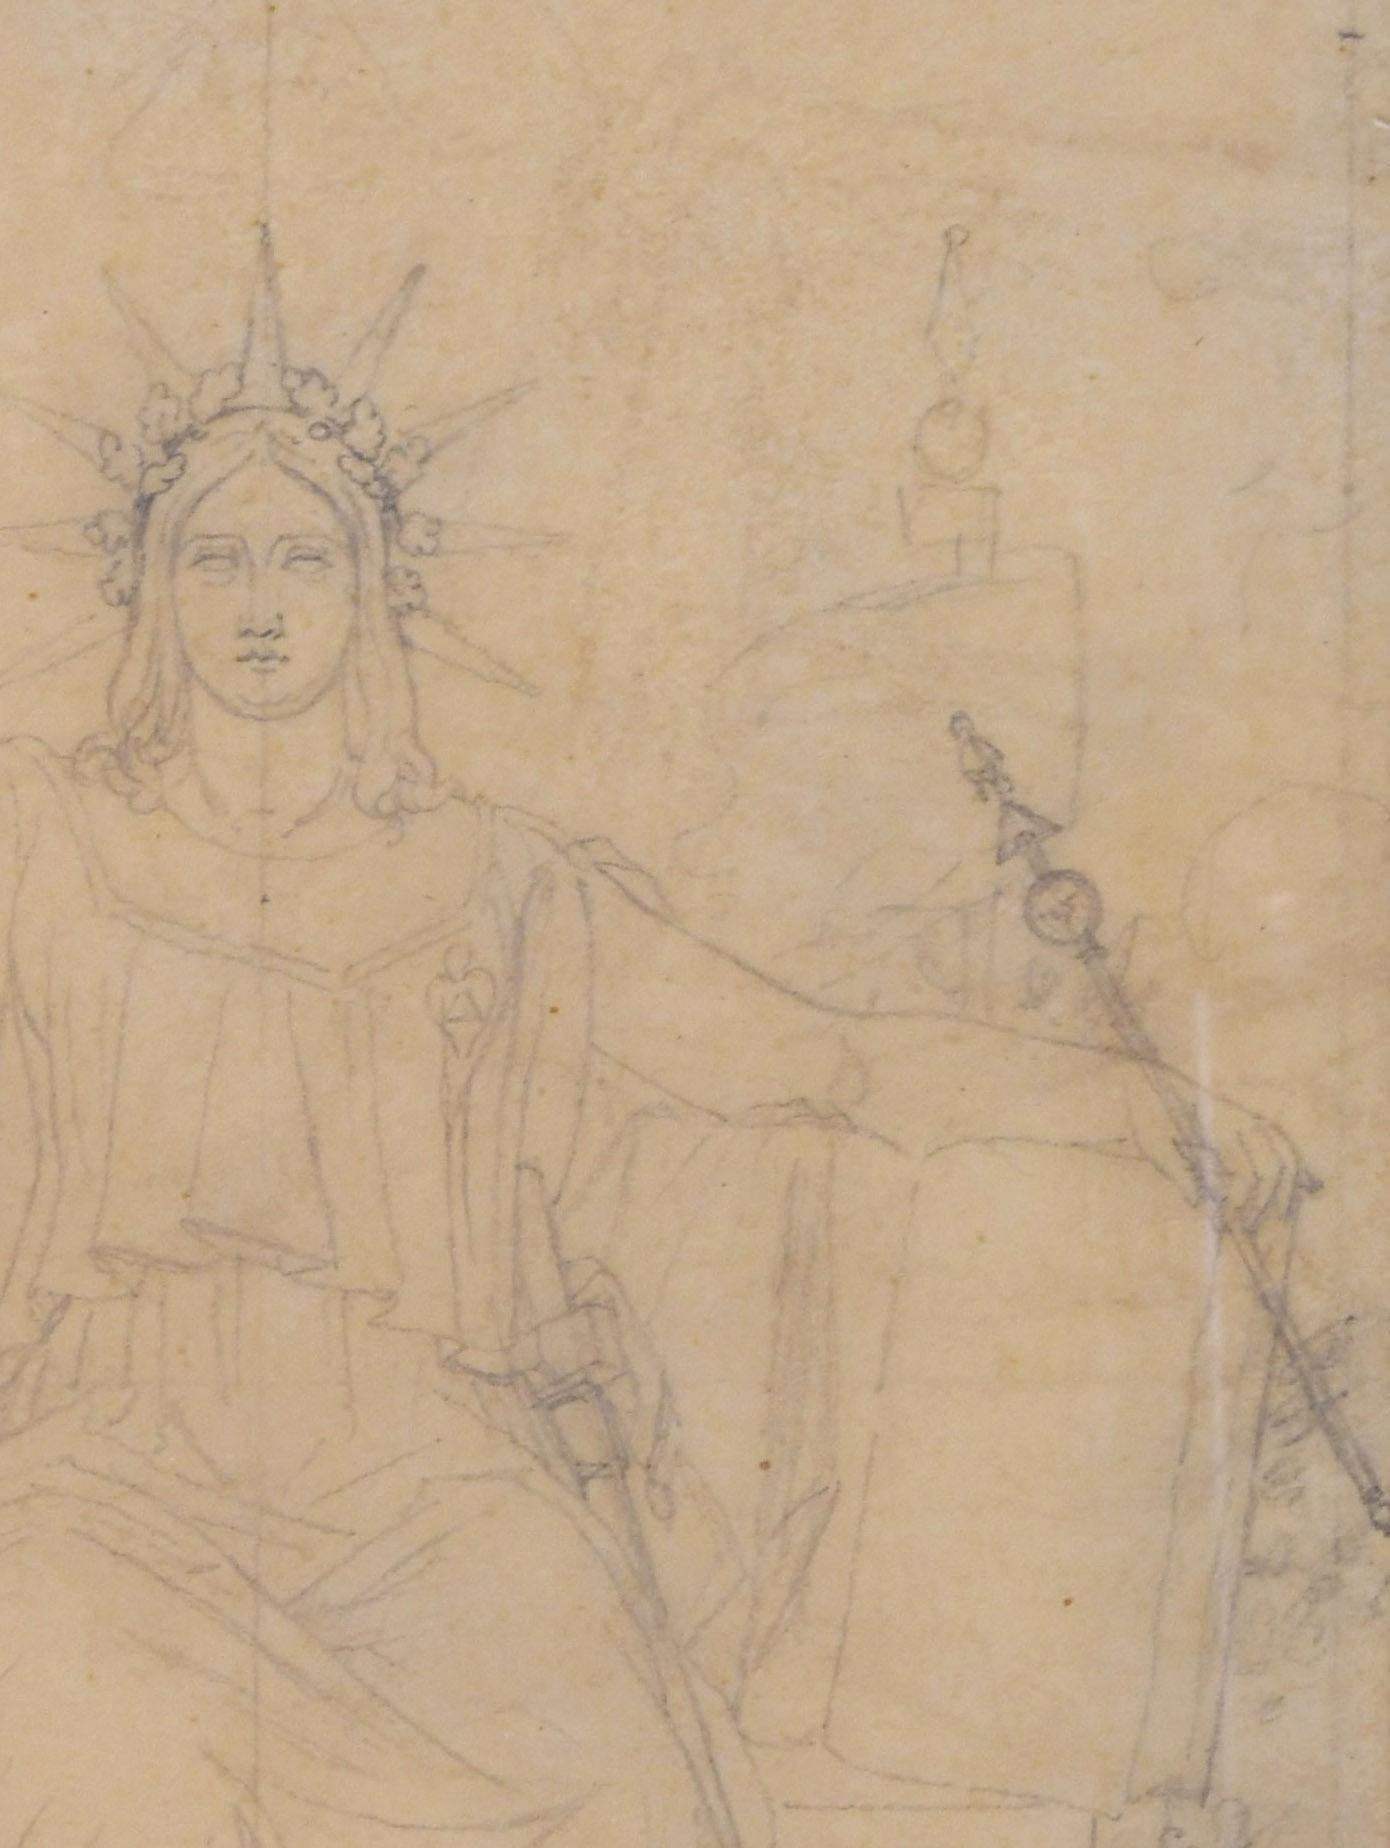 Study for “Republic Standing”
Graphite on calque tracking paper, c. 1848
Signed lower right corner: Vigneron

Provenance:

Shepherd Gallery, New York

Millie Moorman Collection, Saratoga Springs, NY & Kansas City, MO.

Note: A similar composition by